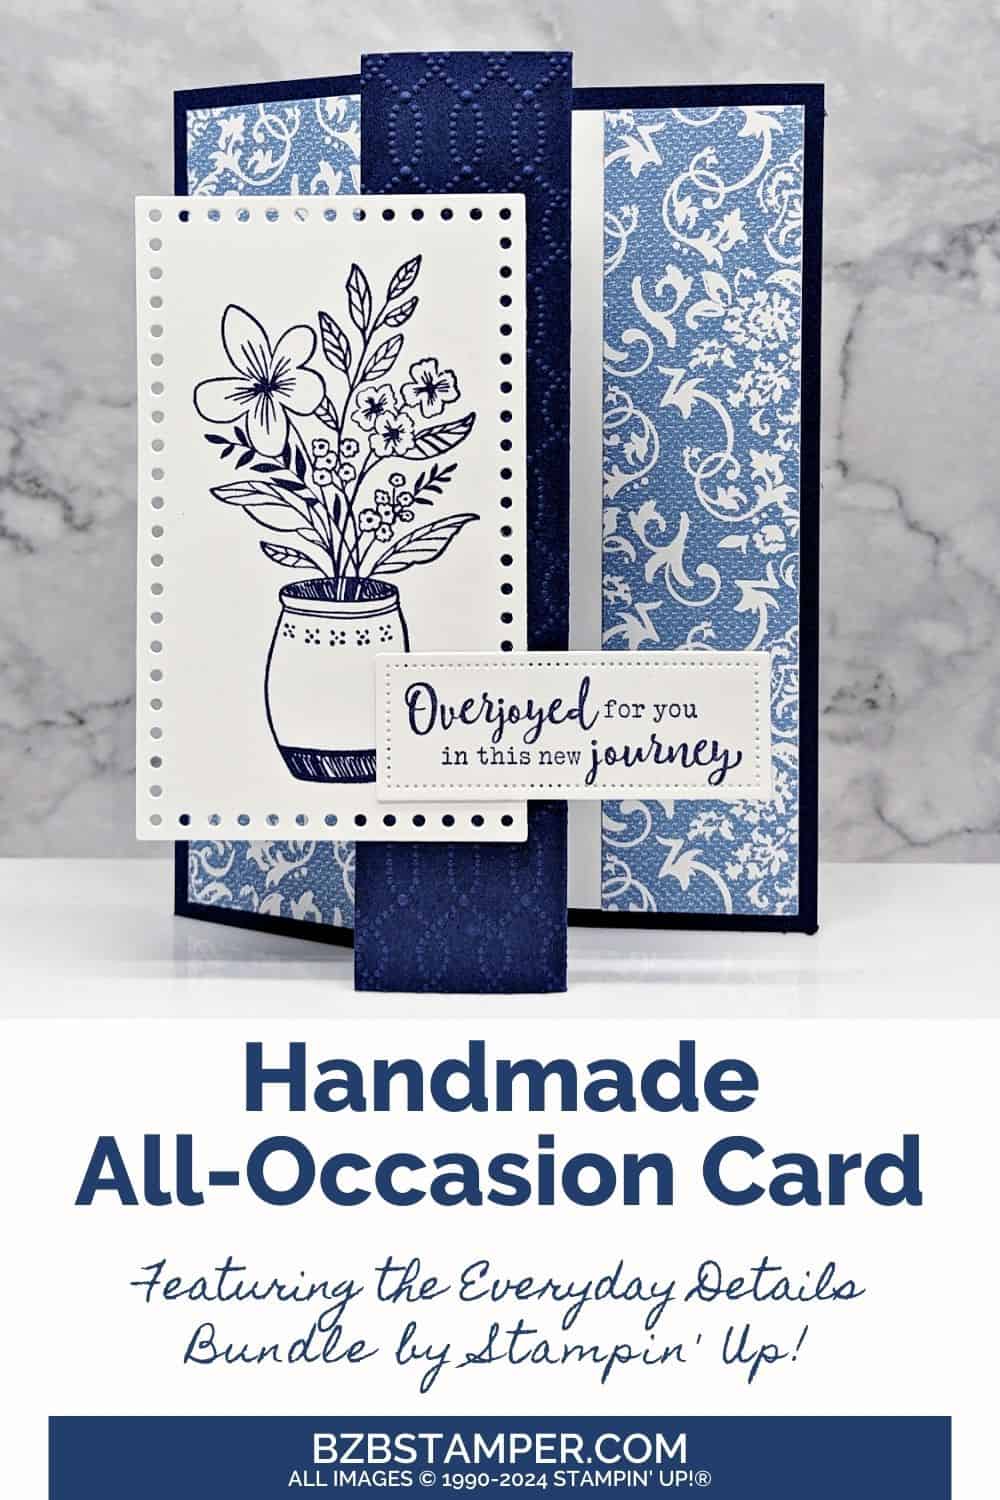 Everyday Details Fun Fold Card in a monochromatic navy blue color scheme.   The focal image is a vase with flowers and a generic all-occasion sentiment.